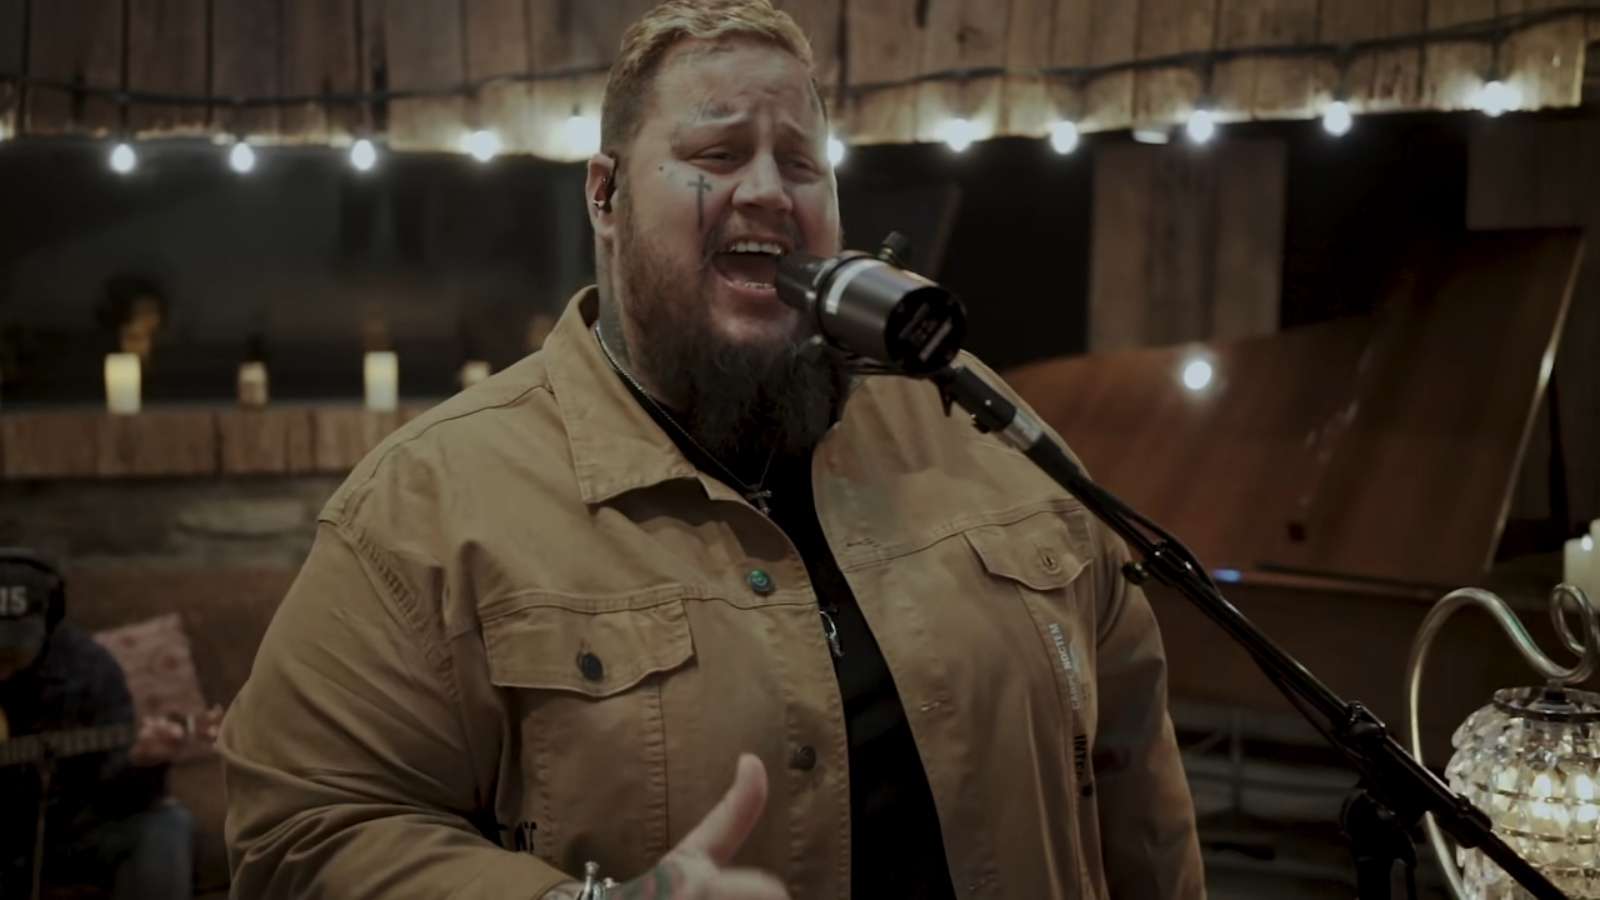 Jelly Roll singing with a microphone in an acoustic video